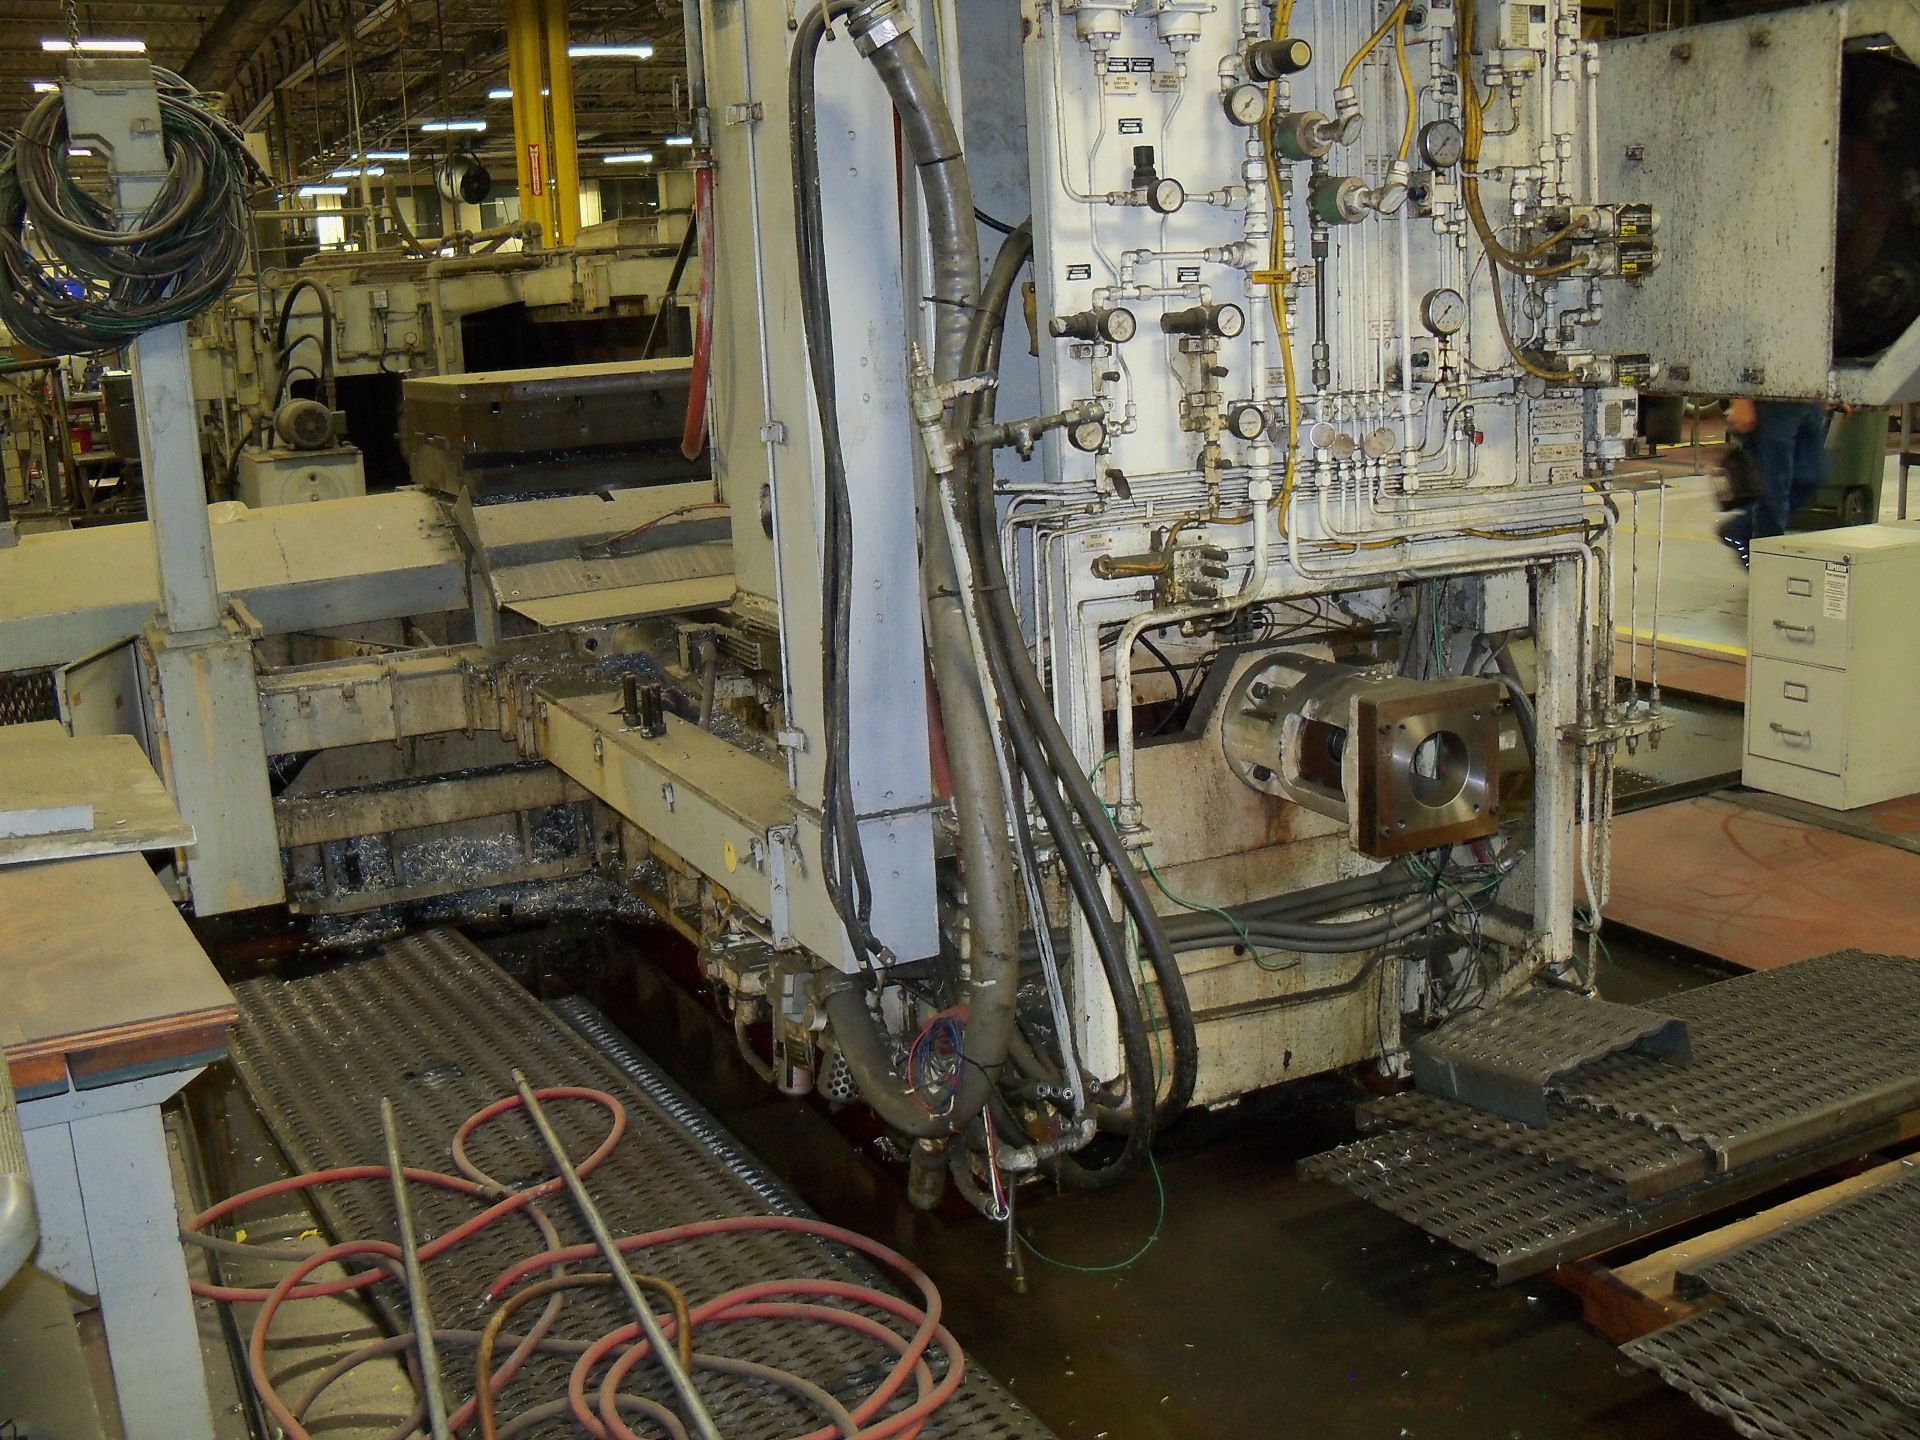 Excello 520 CNC Horizontal Mill, Mitsubishi Ctrl, 32 ATC, Rotary Table (Located in Thomasville, GA) - Image 4 of 10